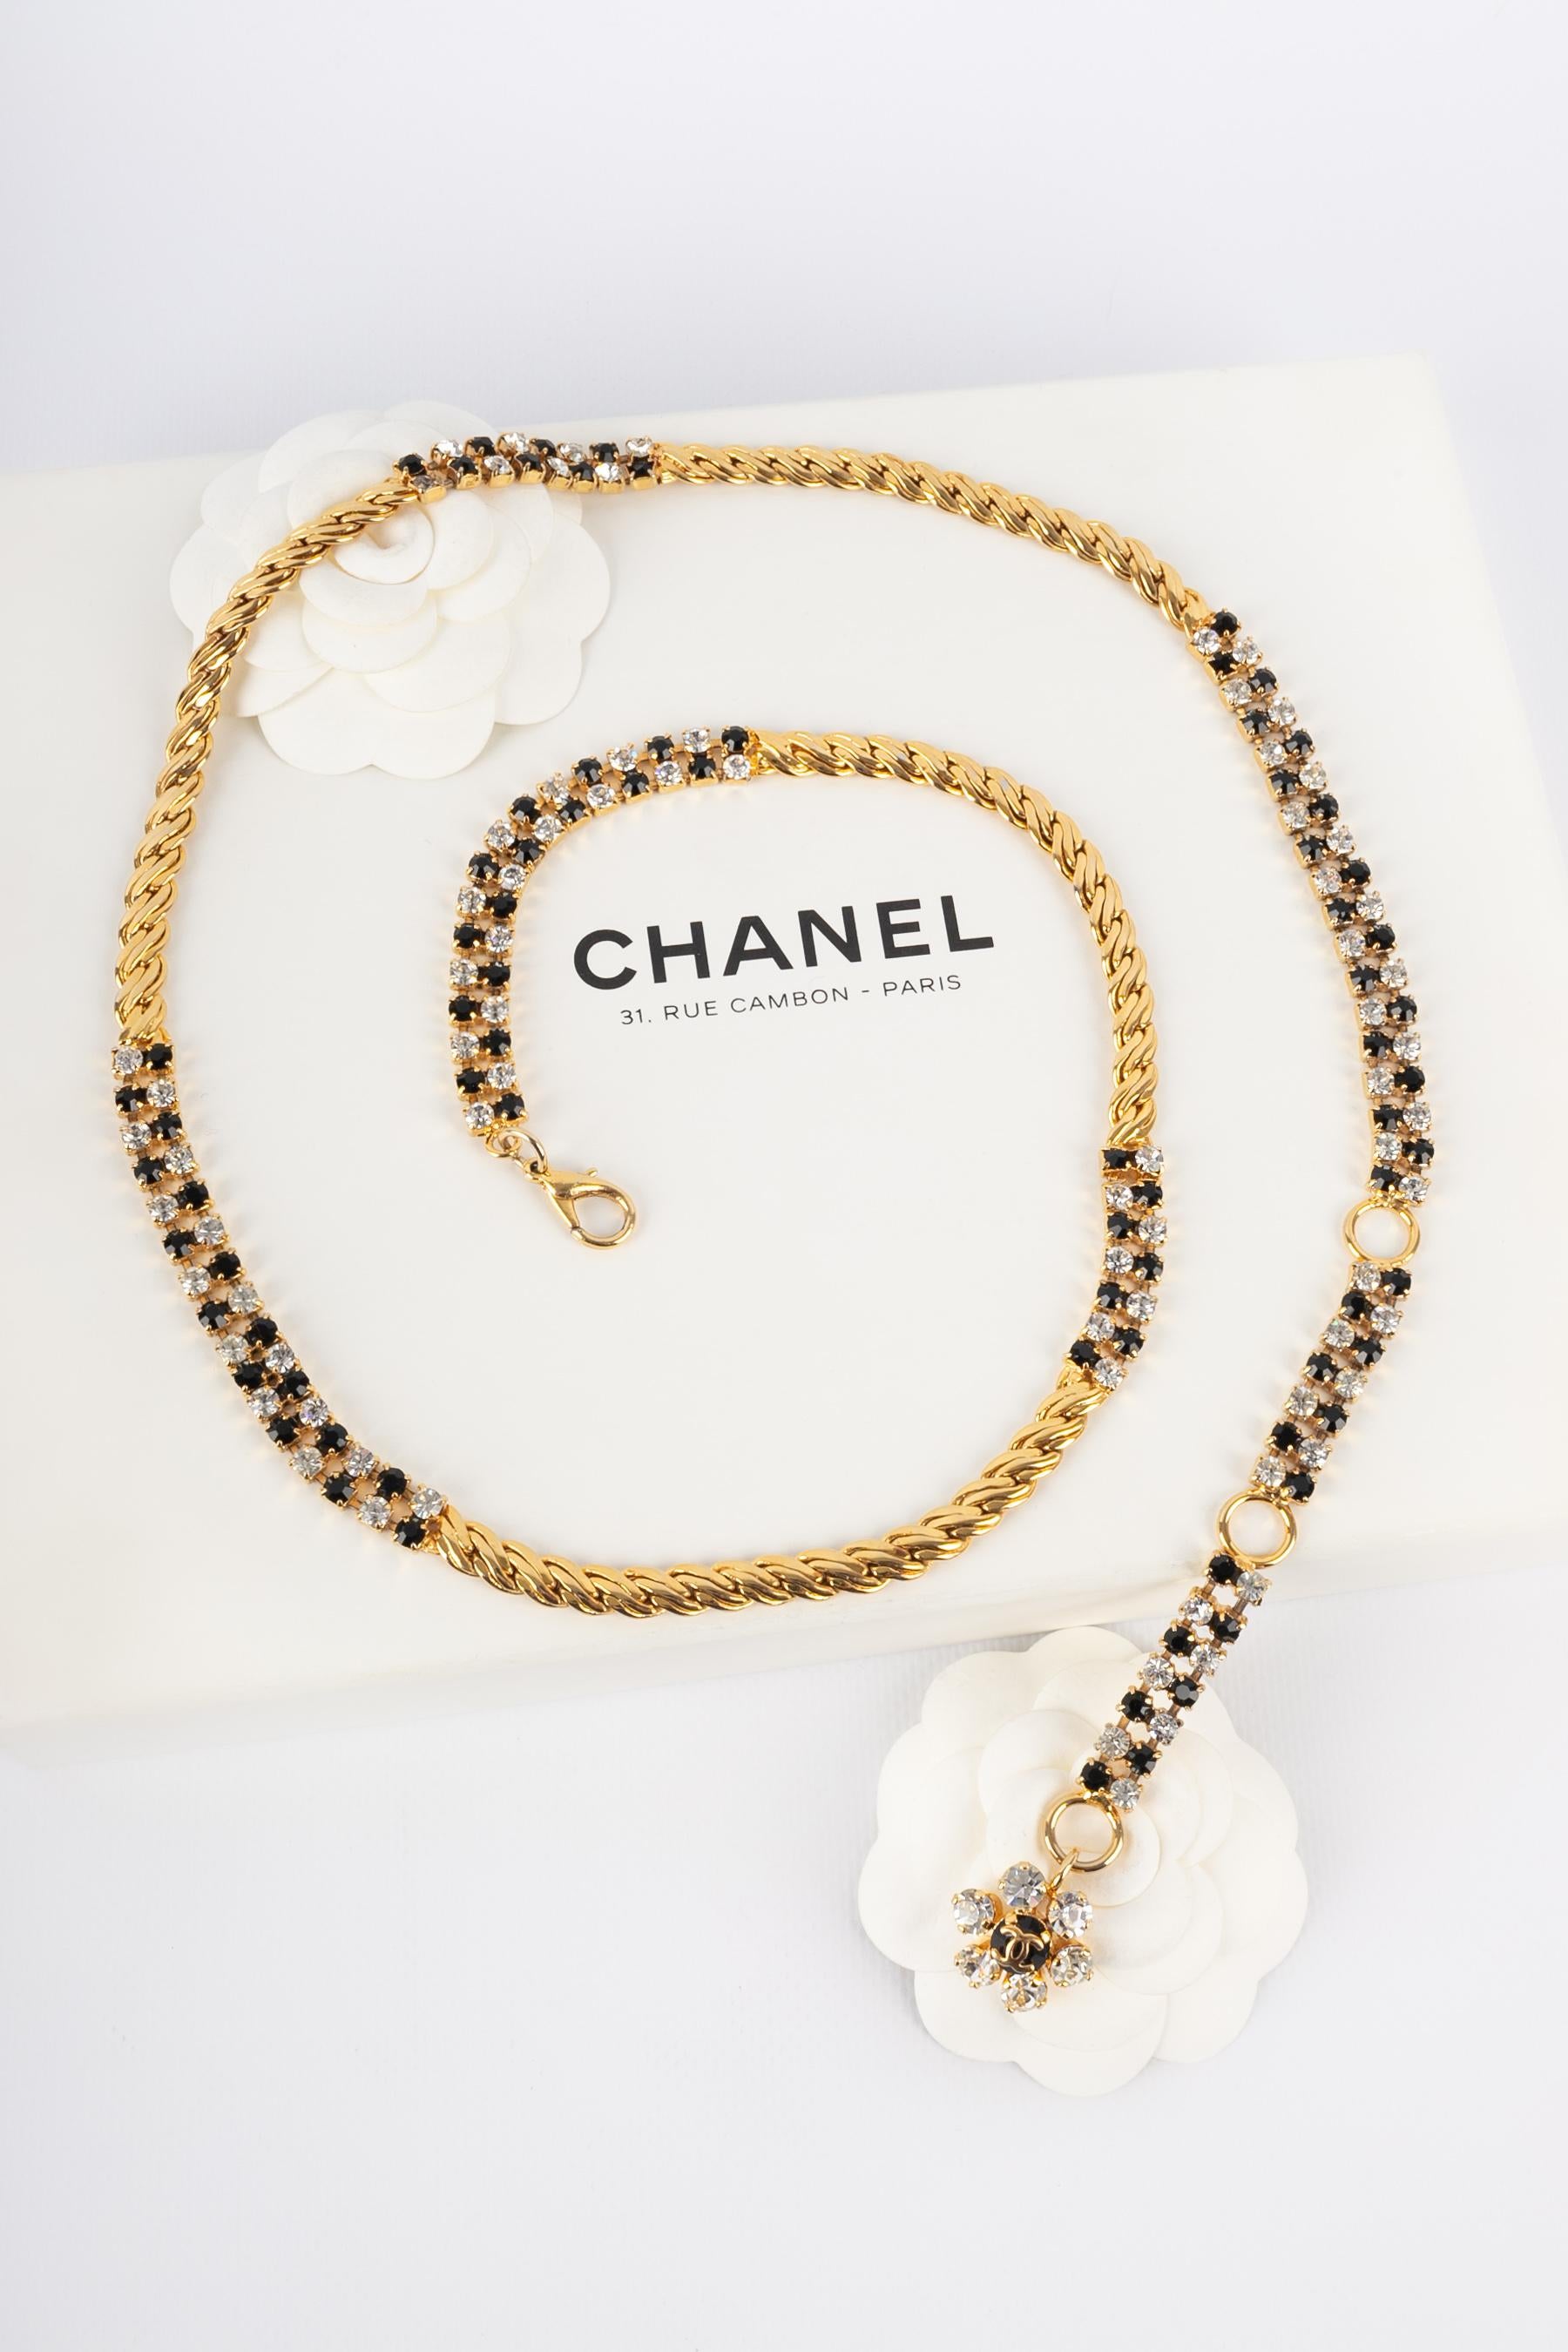 CHANEL - (Made in France) Golden metal articulated belt with rhinestones. 1997 Spring-Summer Collection.

Condition:
Very good condition

Dimensions:
Length: 84 cm // 89 cm // 94 cm

CCB59